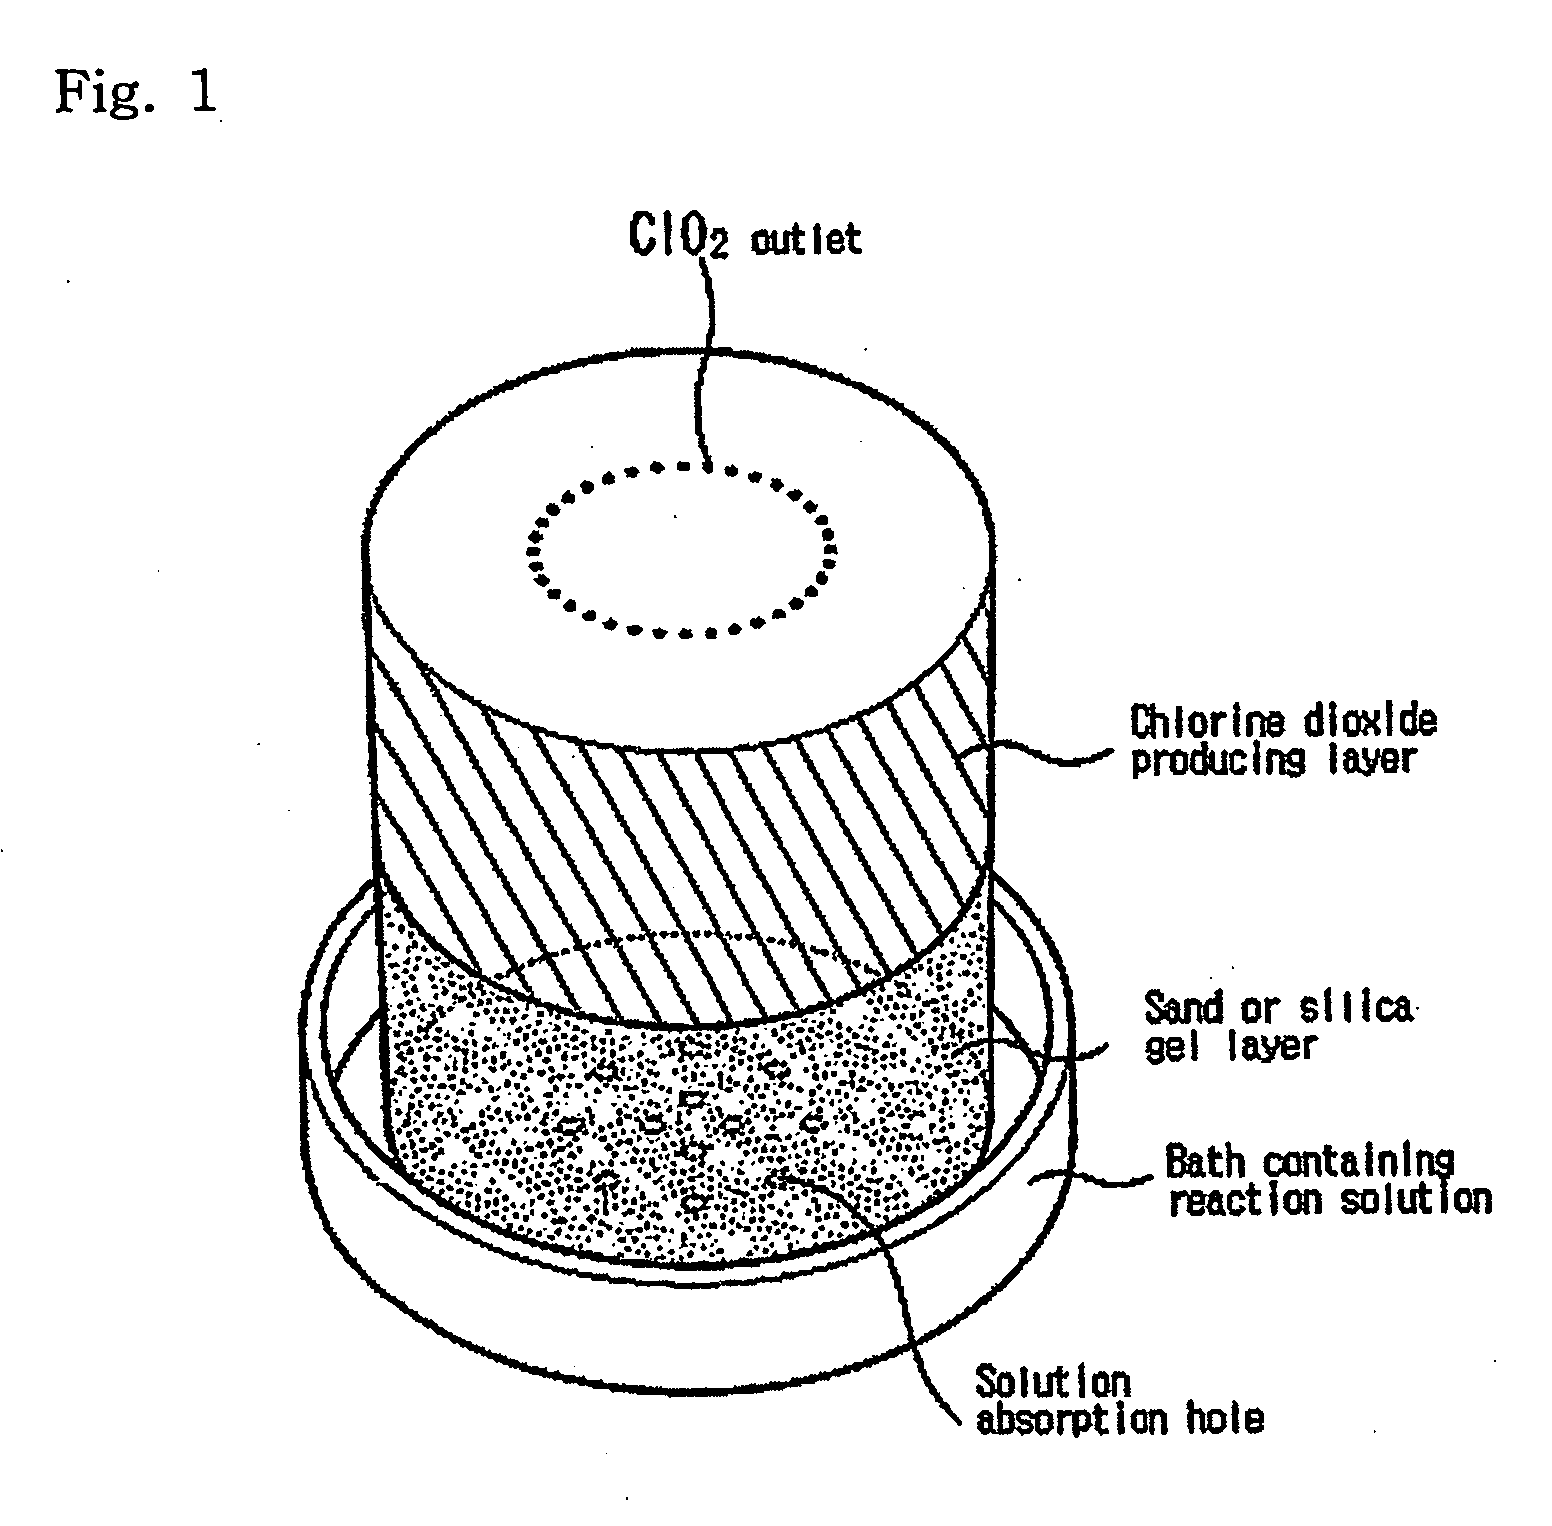 Simple apparatus for producing chlorine dioxide gas